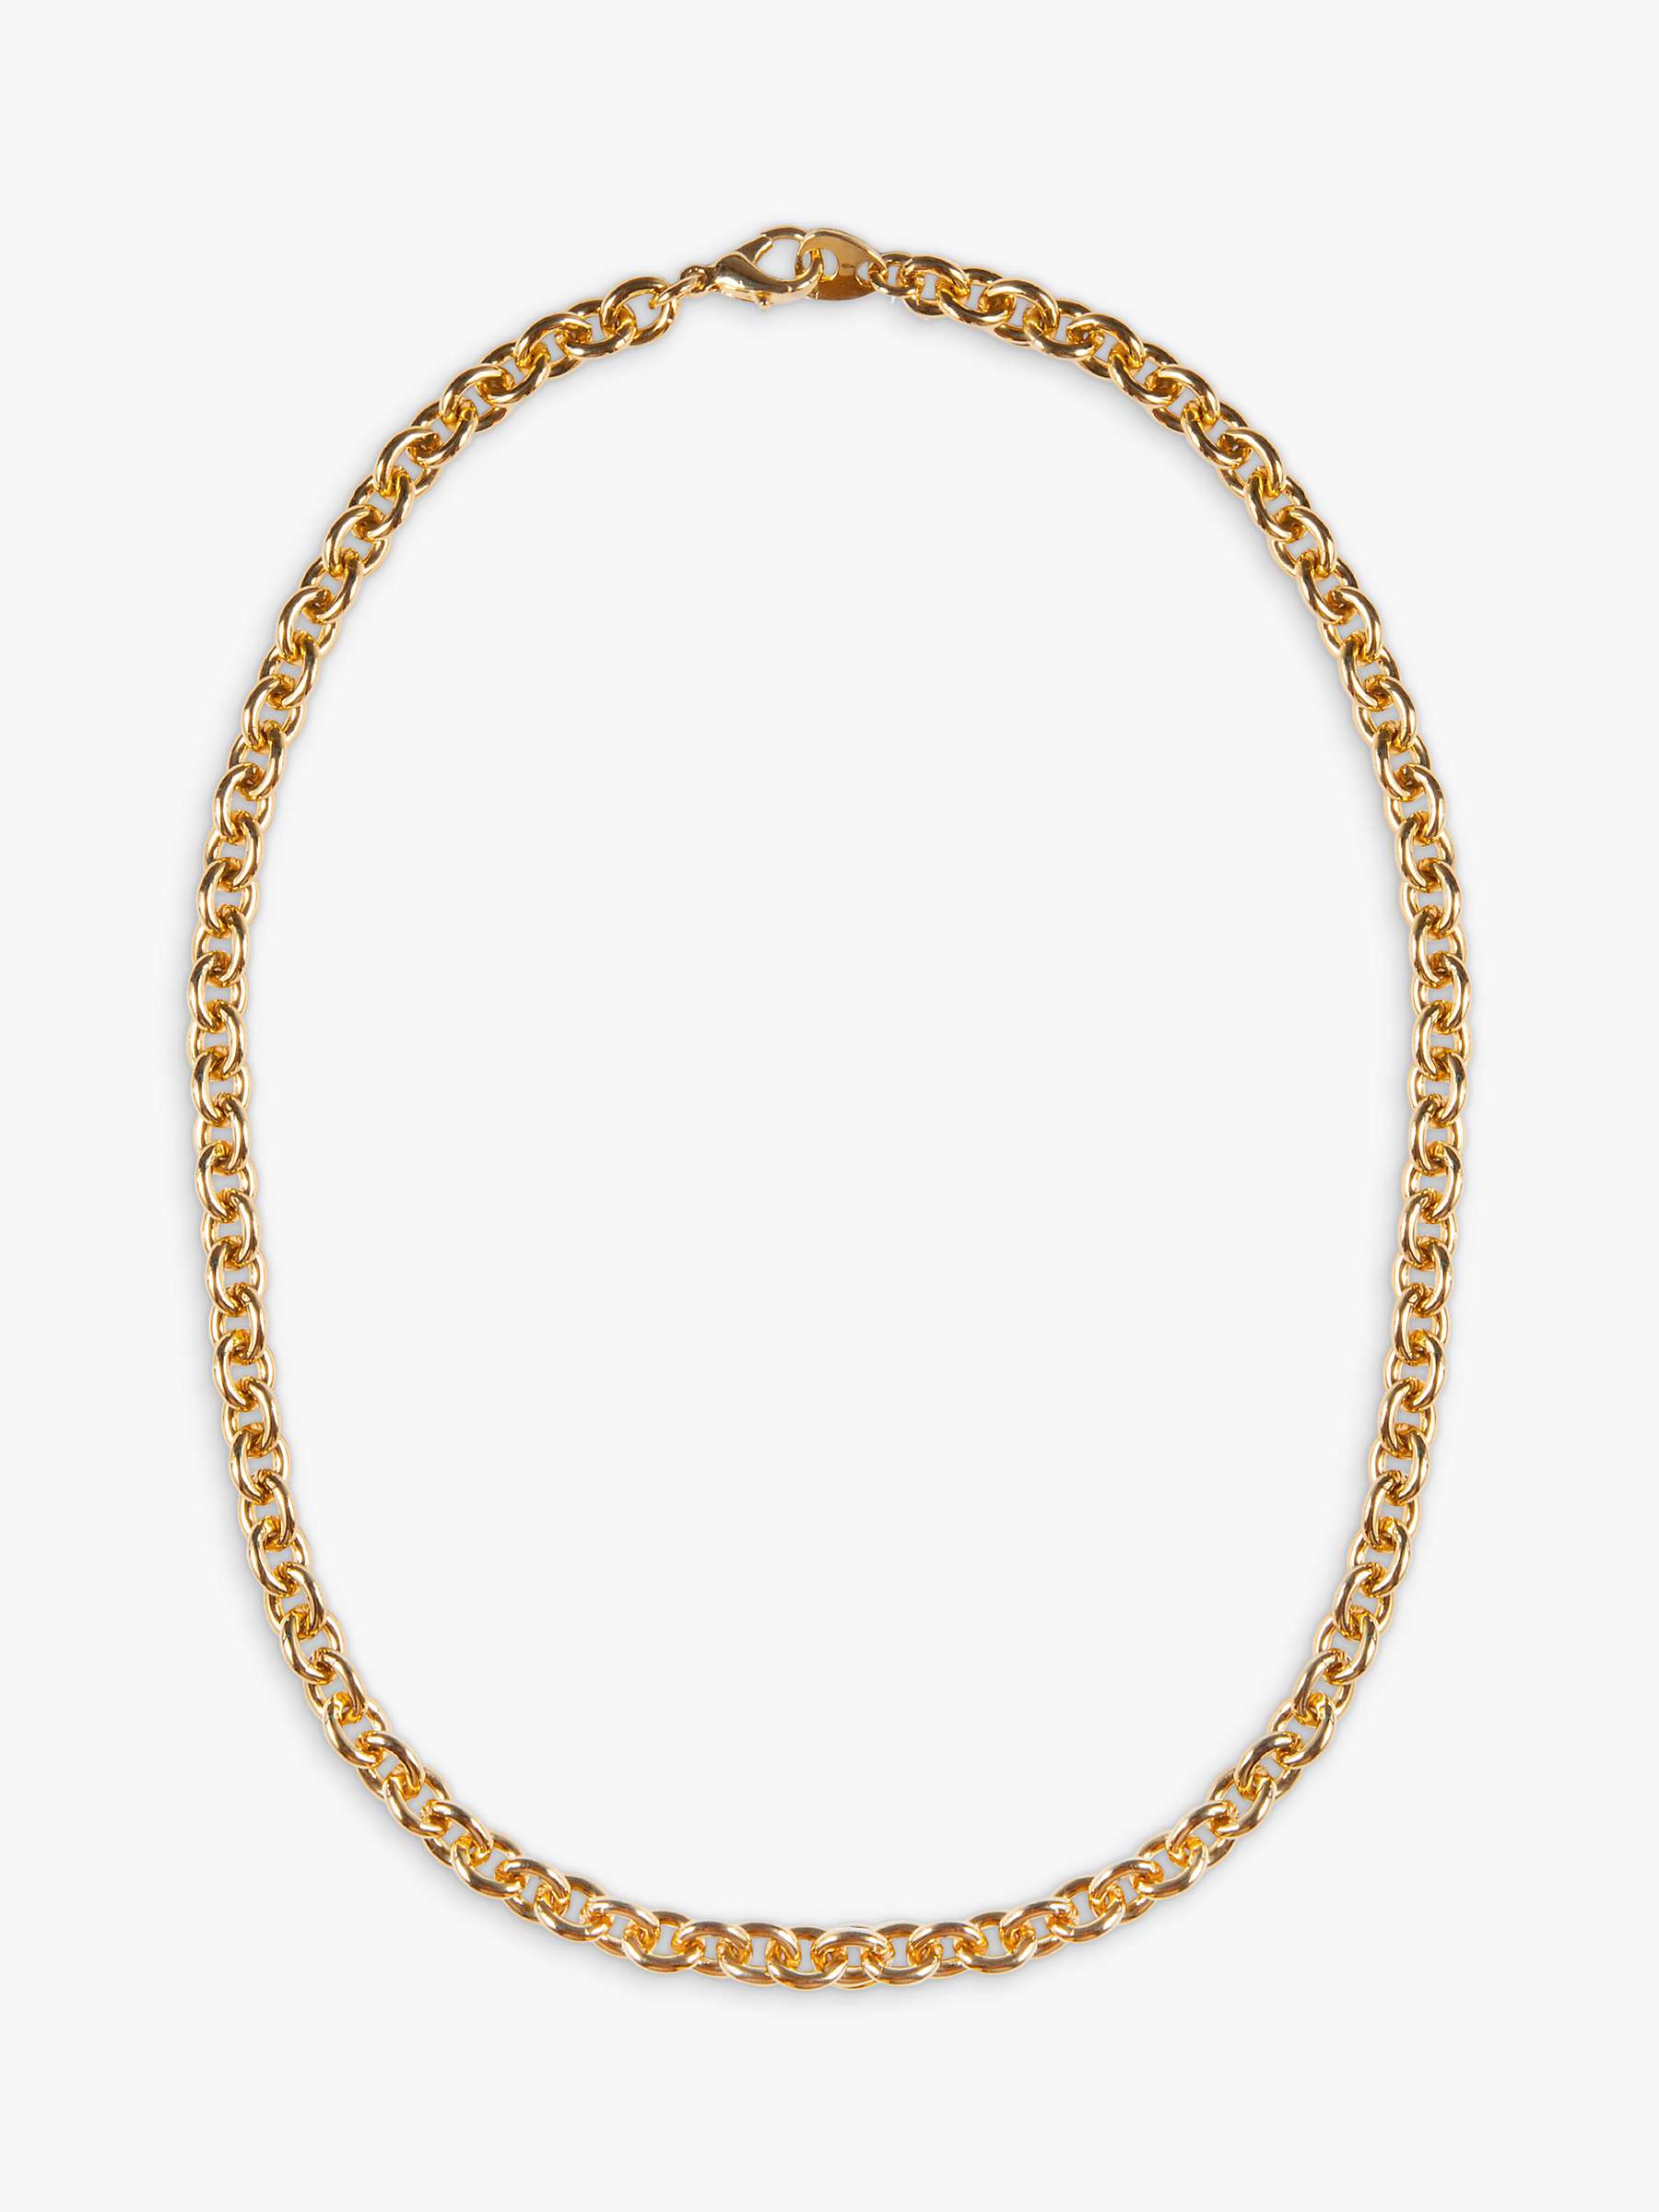 Buy Eclectica Vintage 22ct Gold Plated Chain Necklace, Dated Circa 1980s Online at johnlewis.com